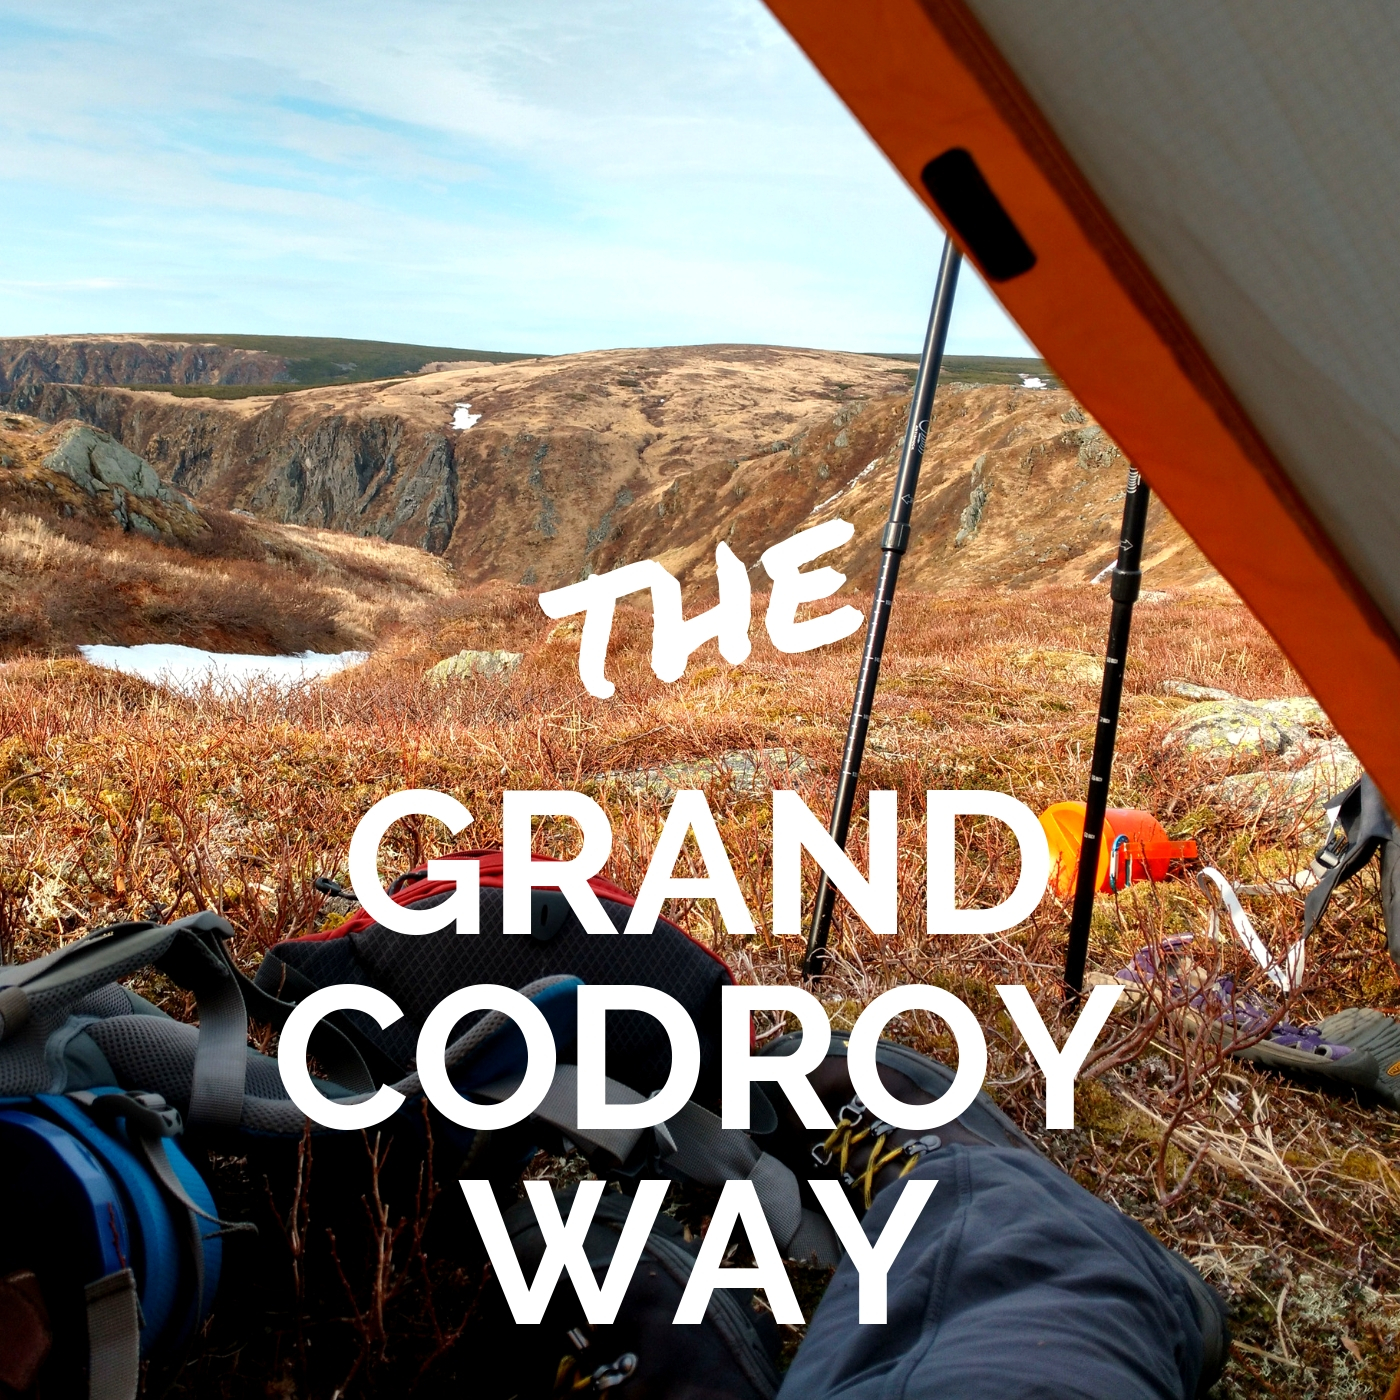 The Grand Codroy Way; Starlite trail and Table Mountain, Starlight trail, trekking, newfoundland, Wildly Intrepid, Map & Compass route